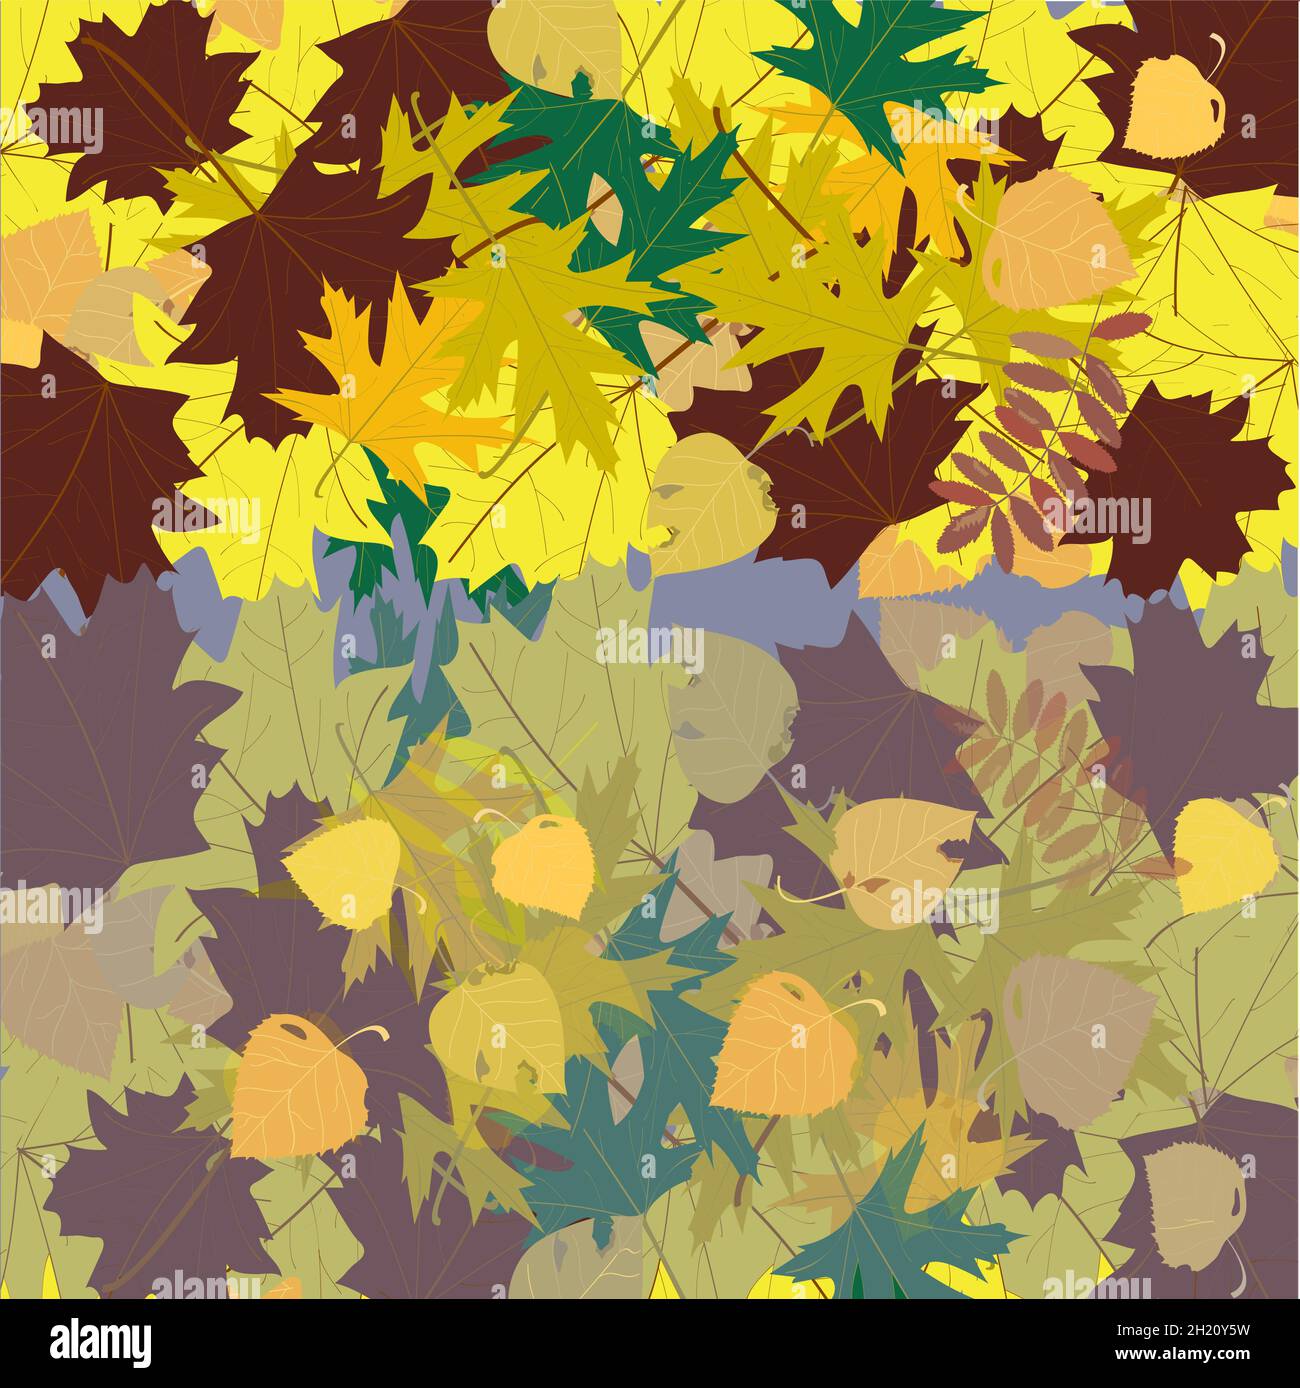 reflection of autumn leaves in water Stock Vector